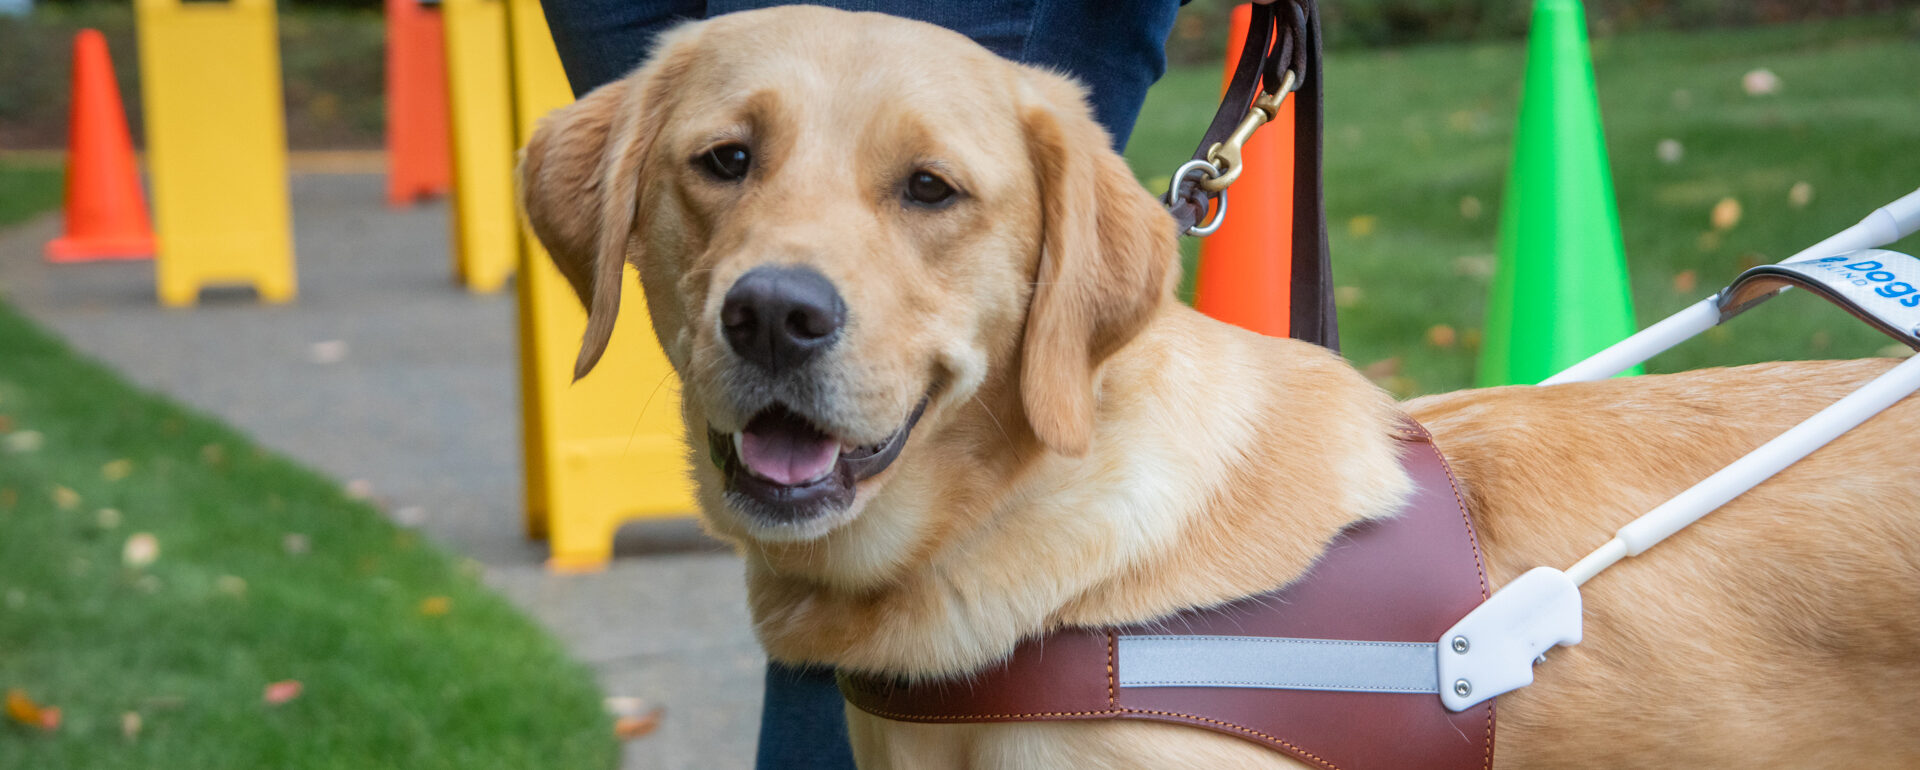 A smiling guide dog with colorful traffic cones in the background.